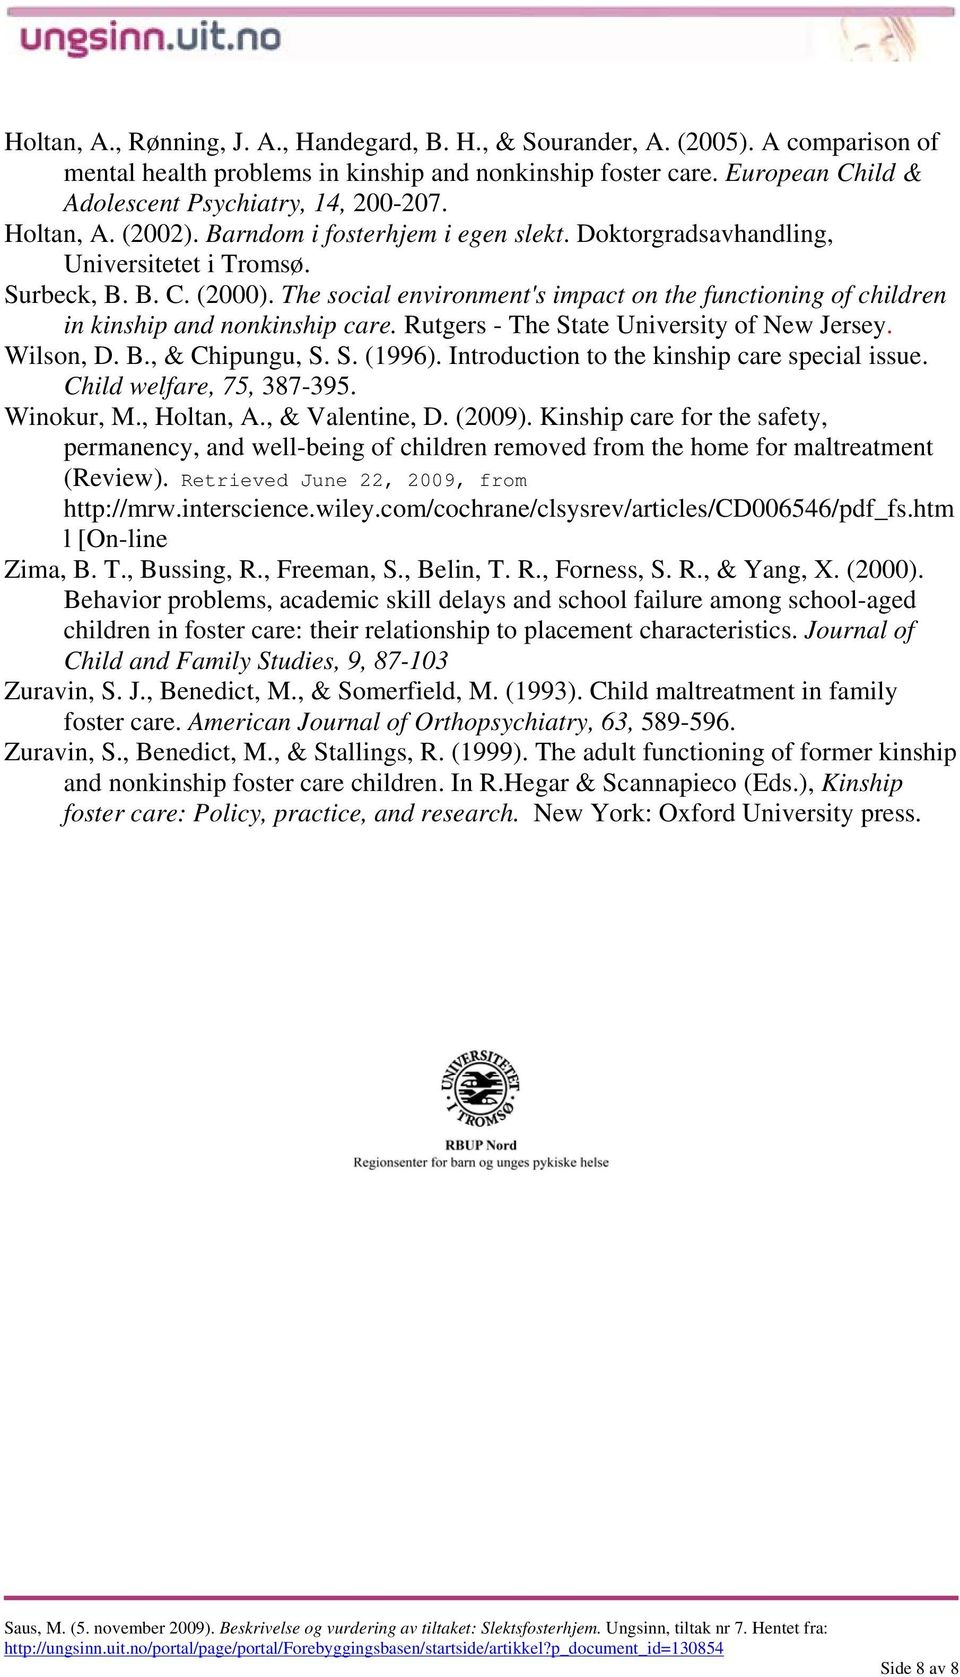 The social environment's impact on the functioning of children in kinship and nonkinship care. Rutgers - The State University of New Jersey. Wilson, D. B., & Chipungu, S. S. (1996).